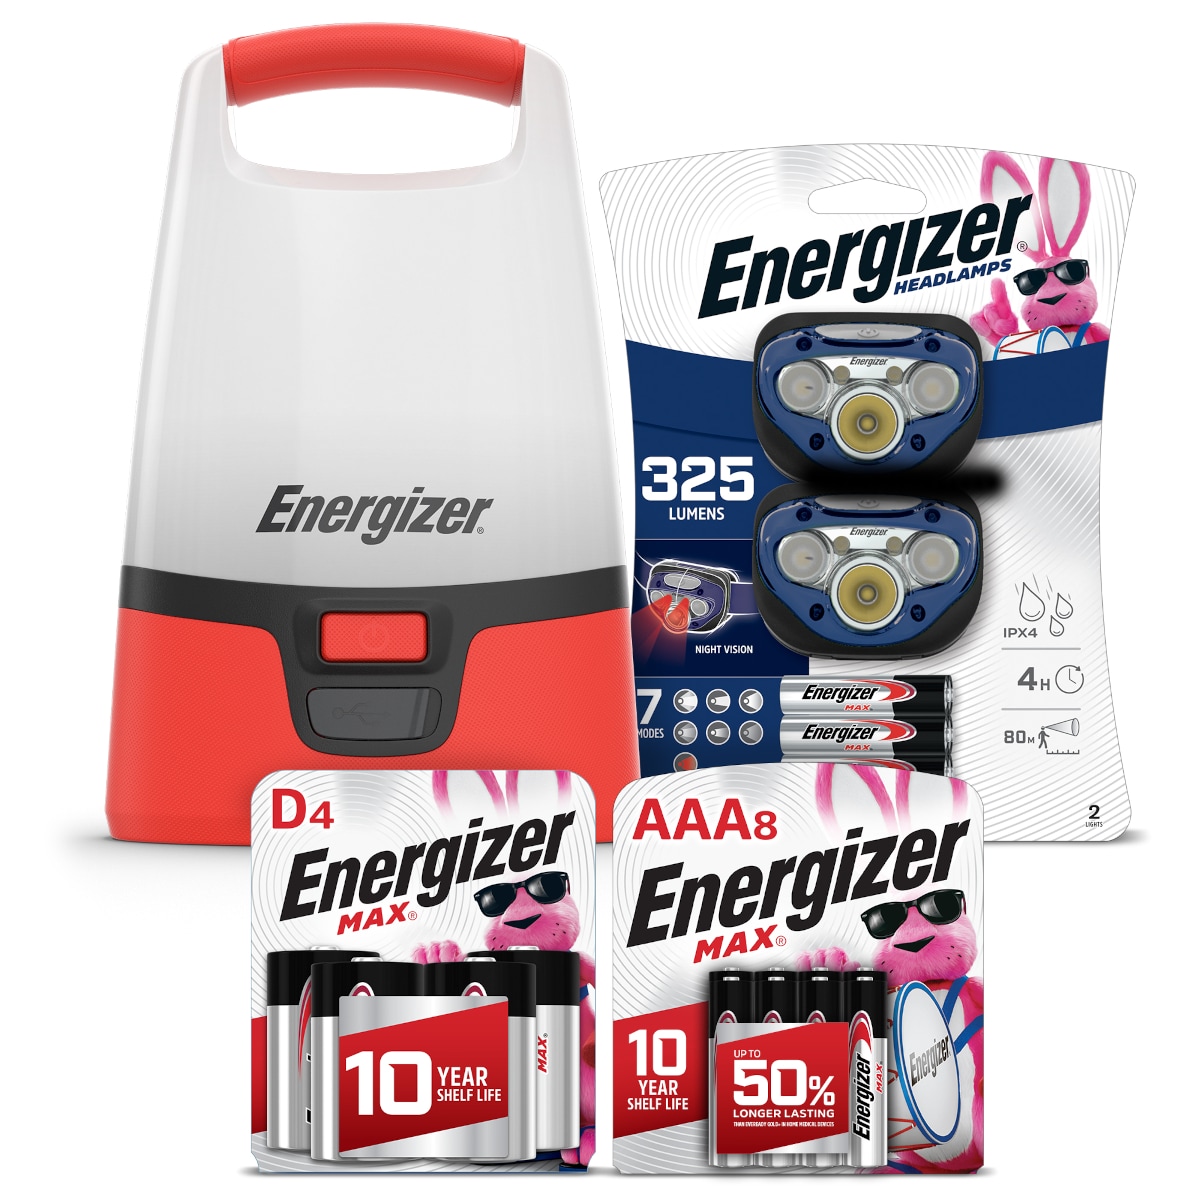 Energizer Energizer 325-Lumen LED Headlamp and 1000-Lumen LED Rechargeable Camping Lantern with Replacement D and AAA Batteries Camping Bundle